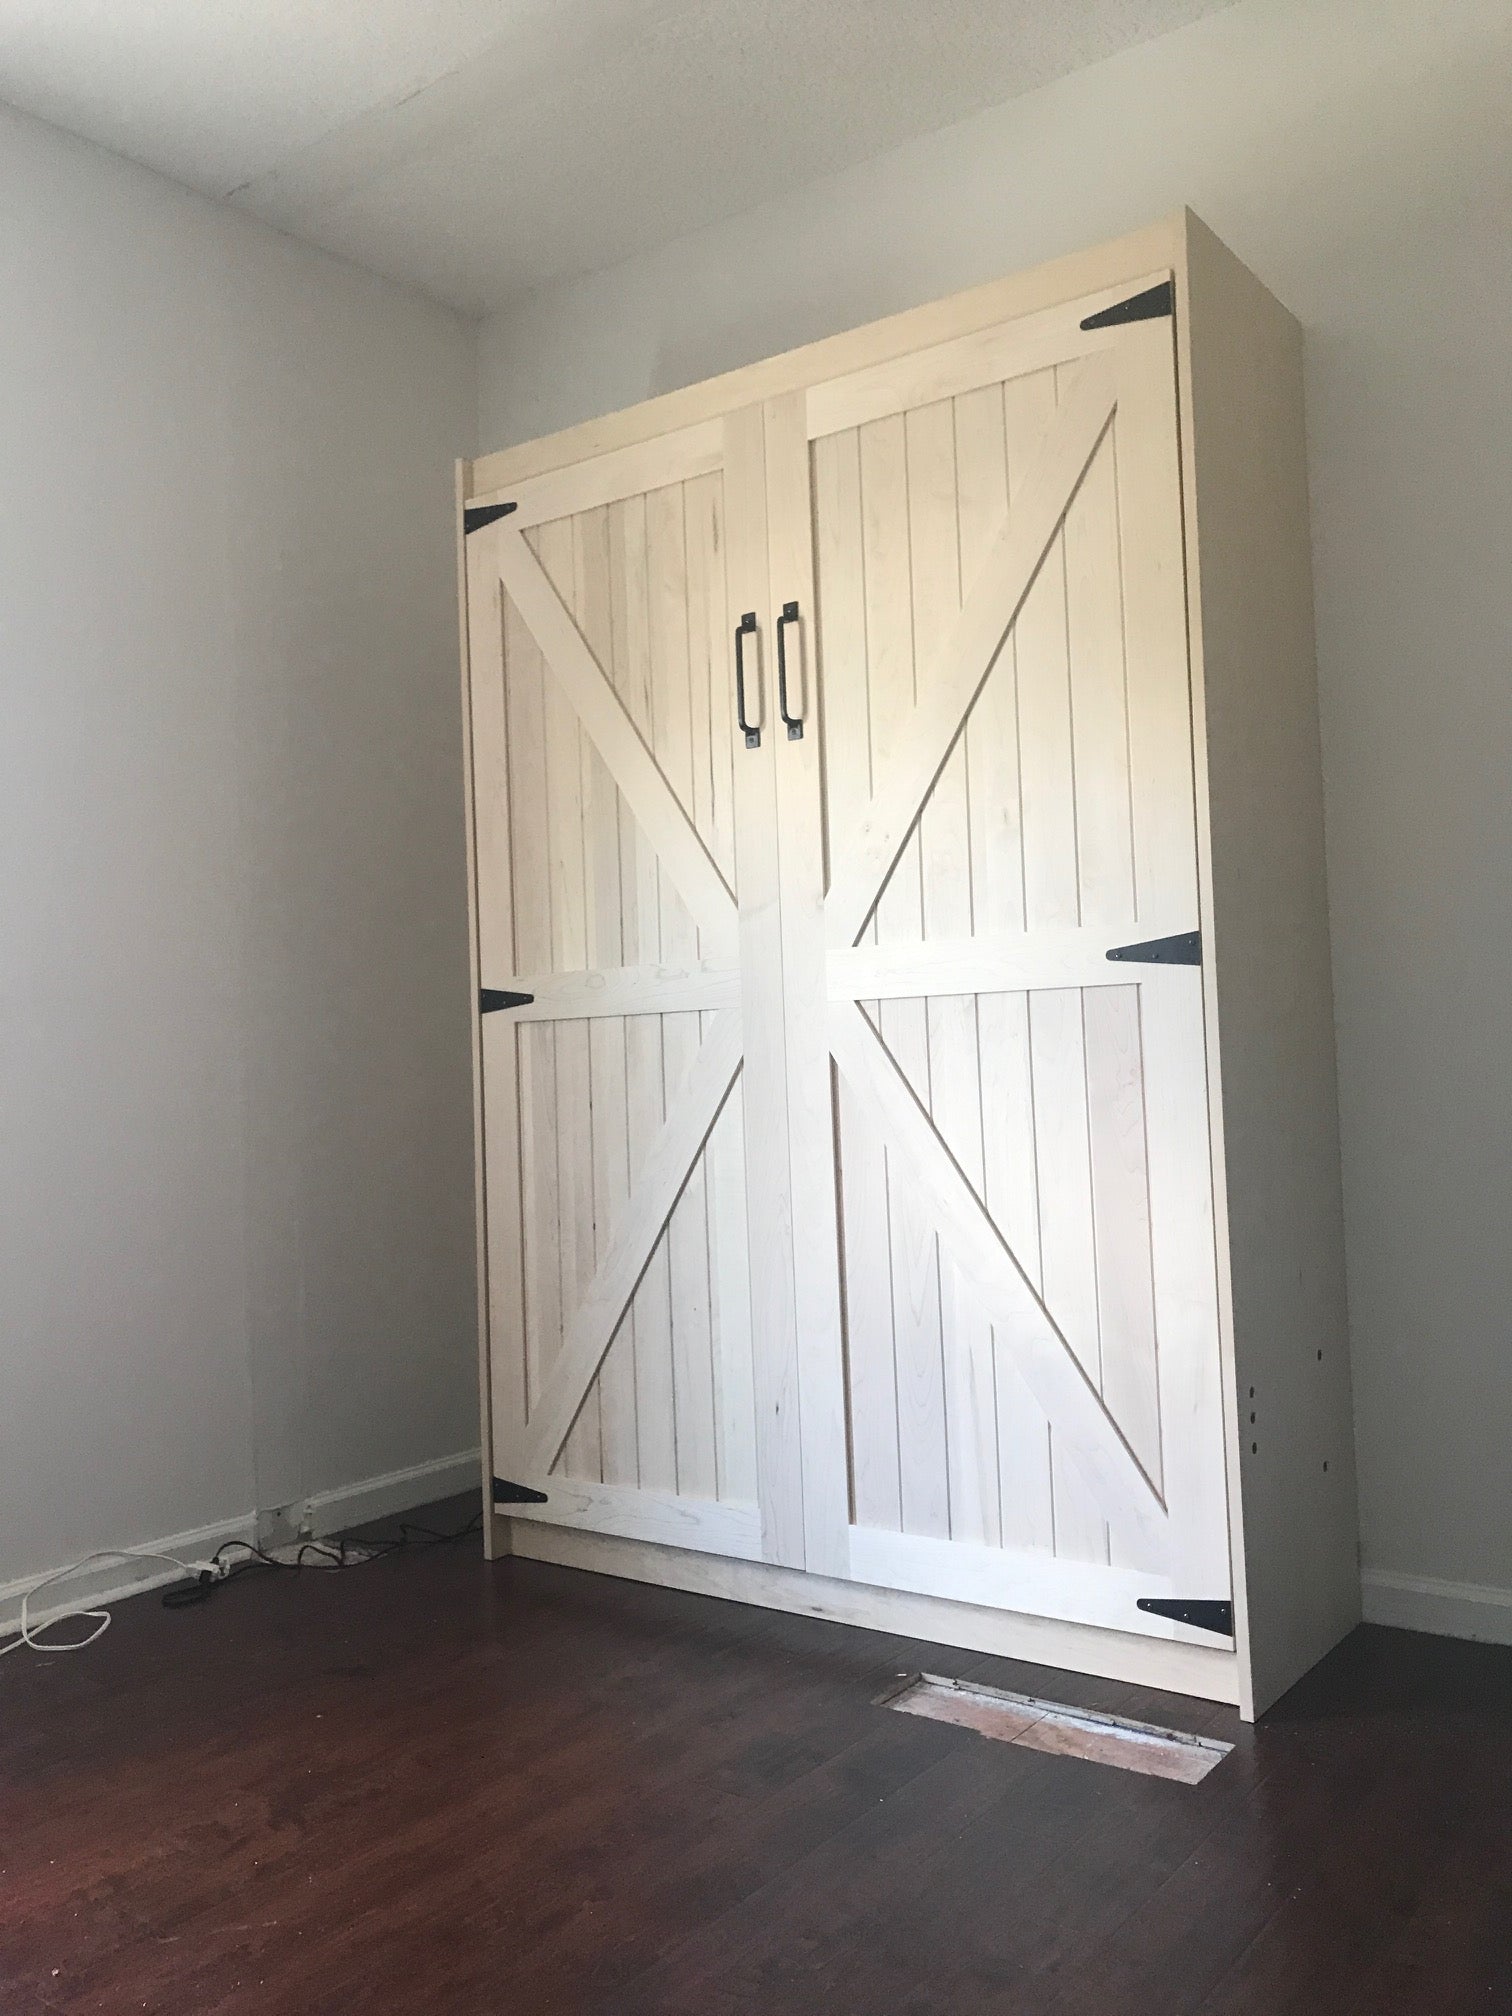 The Barn Door Panel Bed A in color white, left angled view